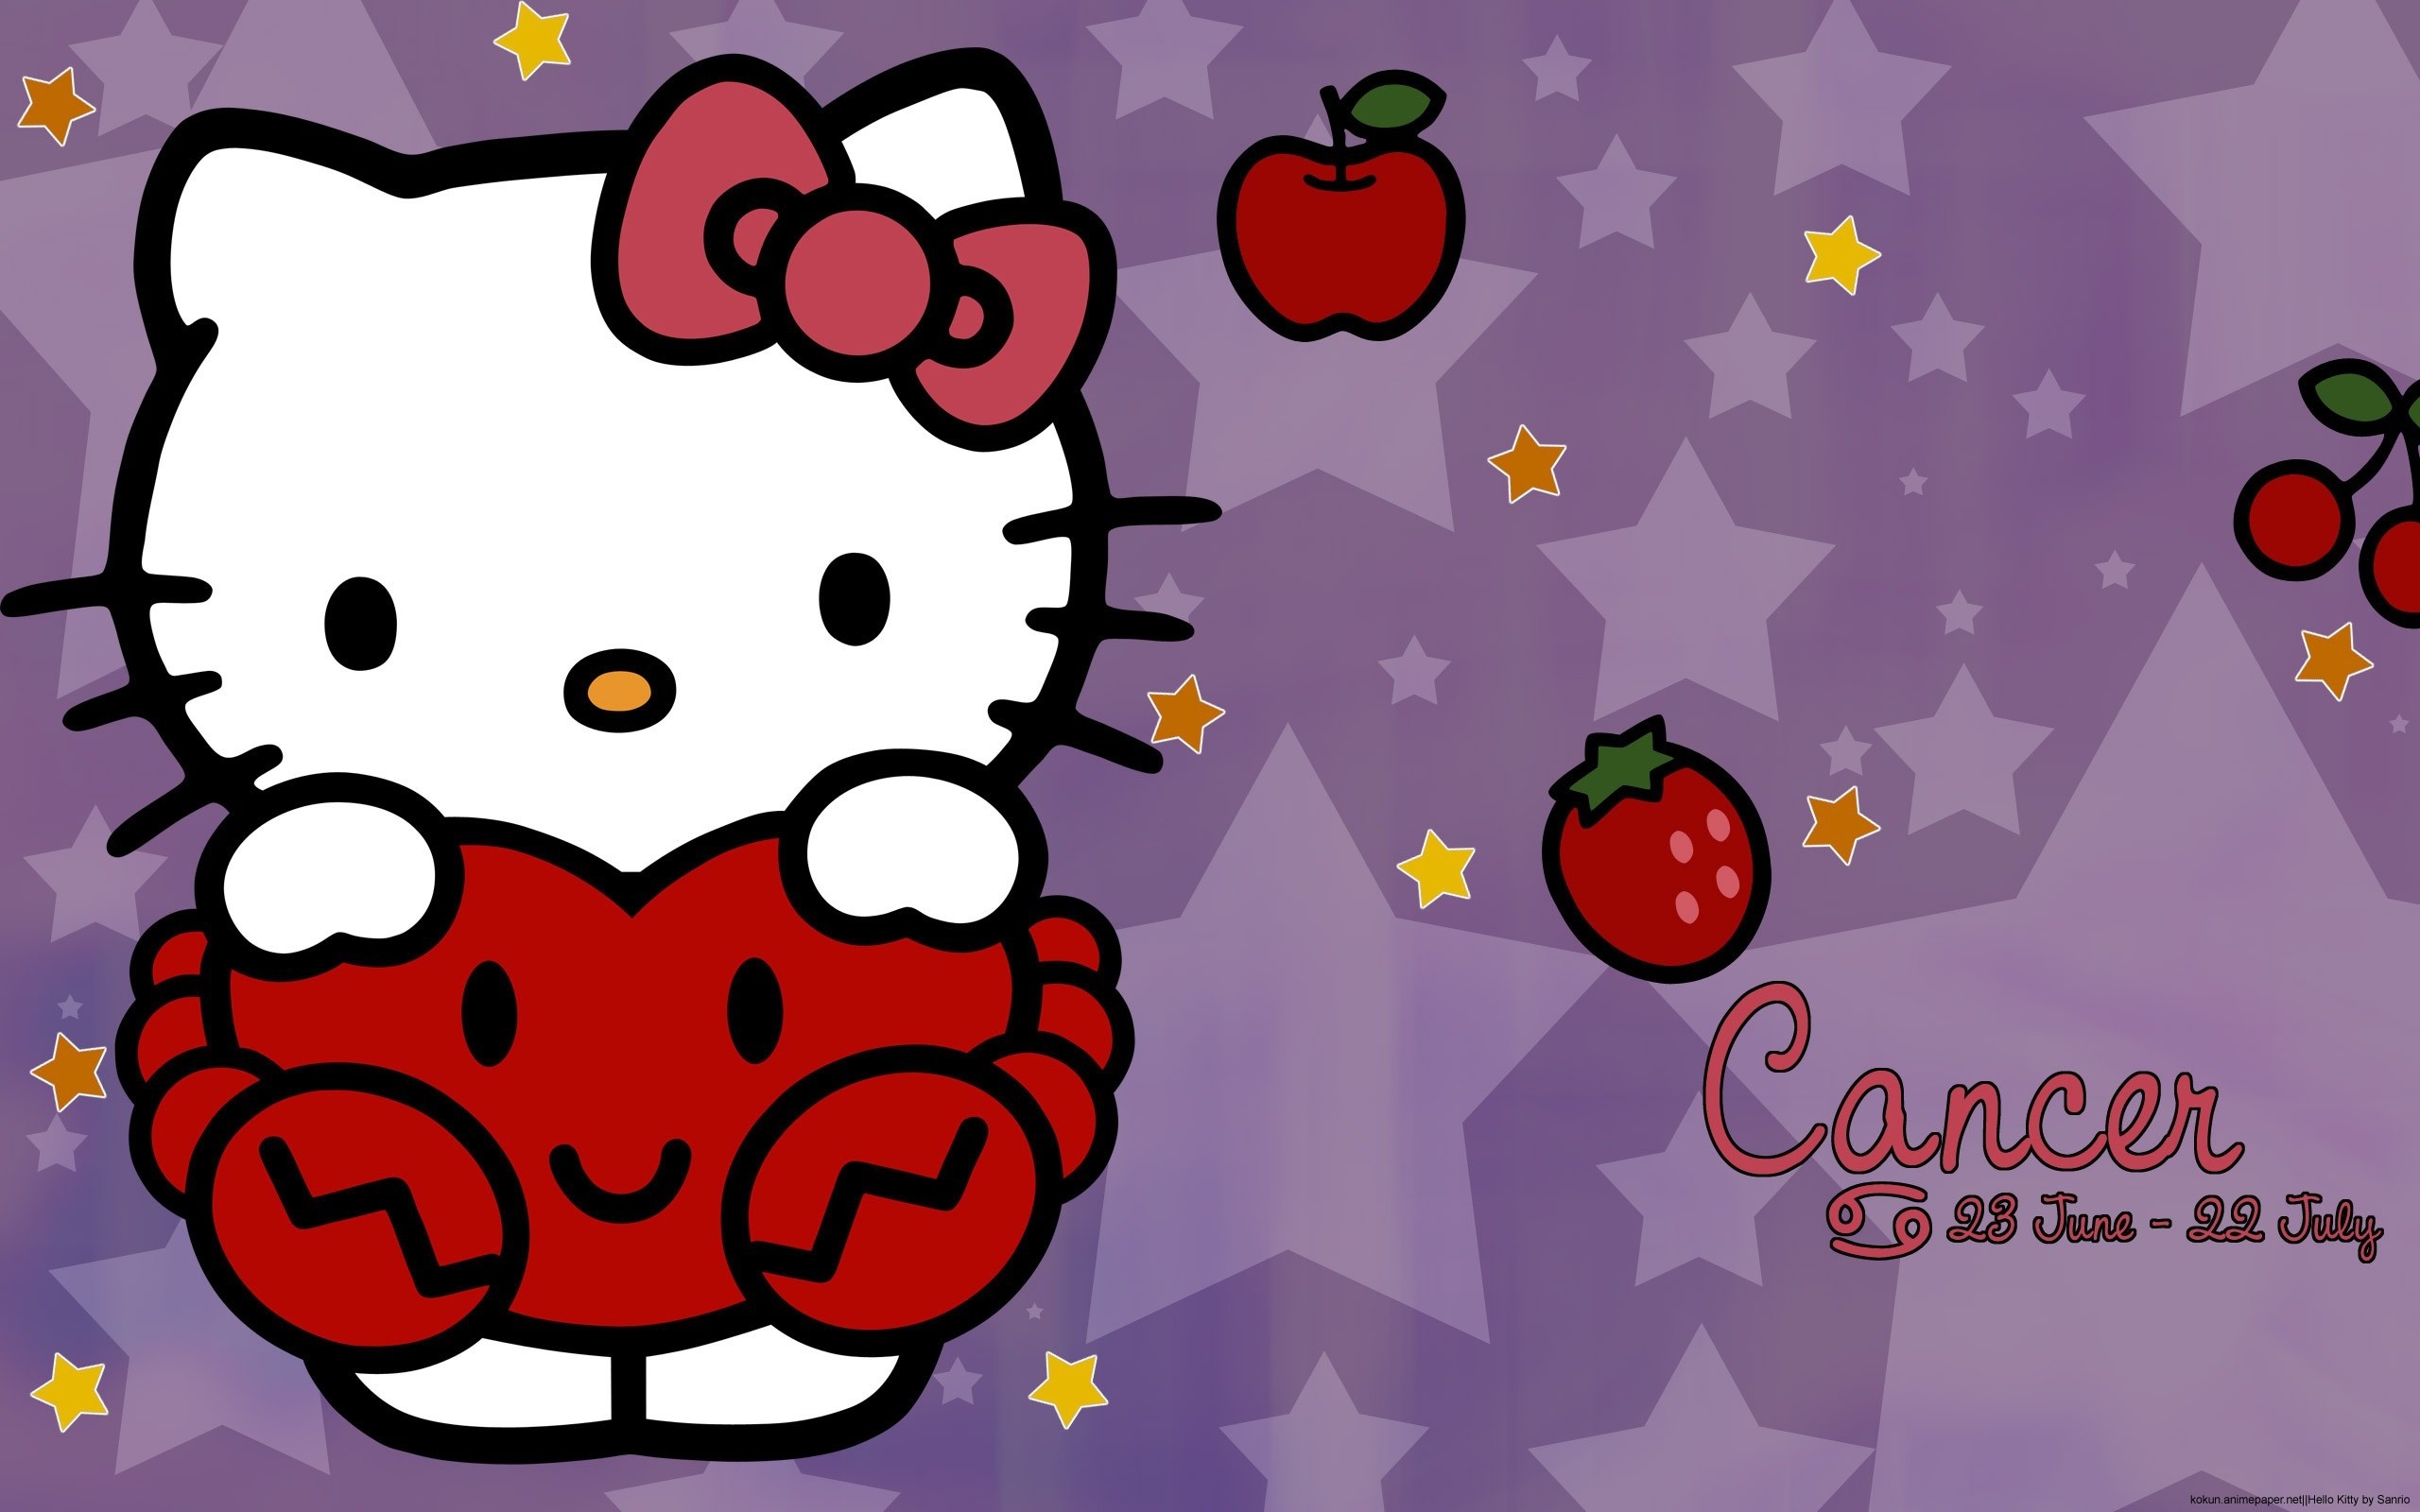 536494 hello kitty desktop backgrounds  Rare Gallery HD Wallpapers